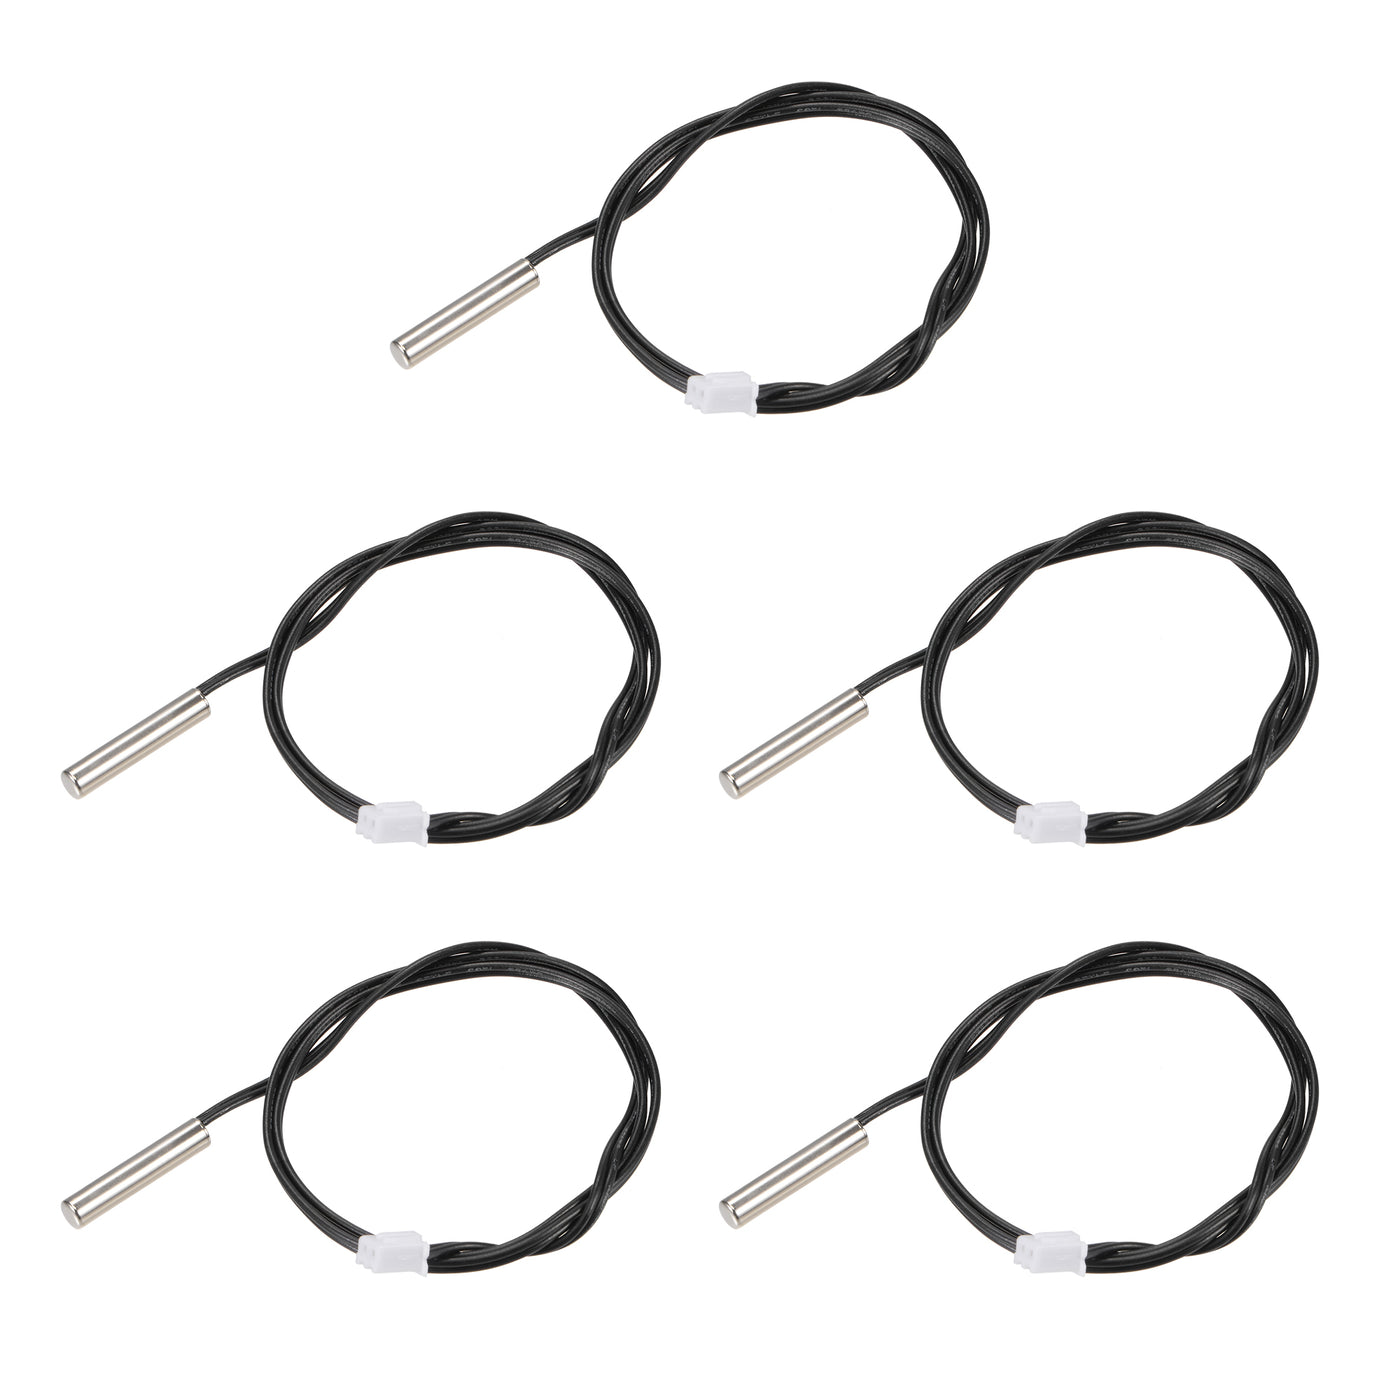 uxcell Uxcell 5pcs 20K Temperature Sensor Probe, Stainless Steel NTC Thermal Sensor Probe 50cm Digital Thermometer Extension Cable